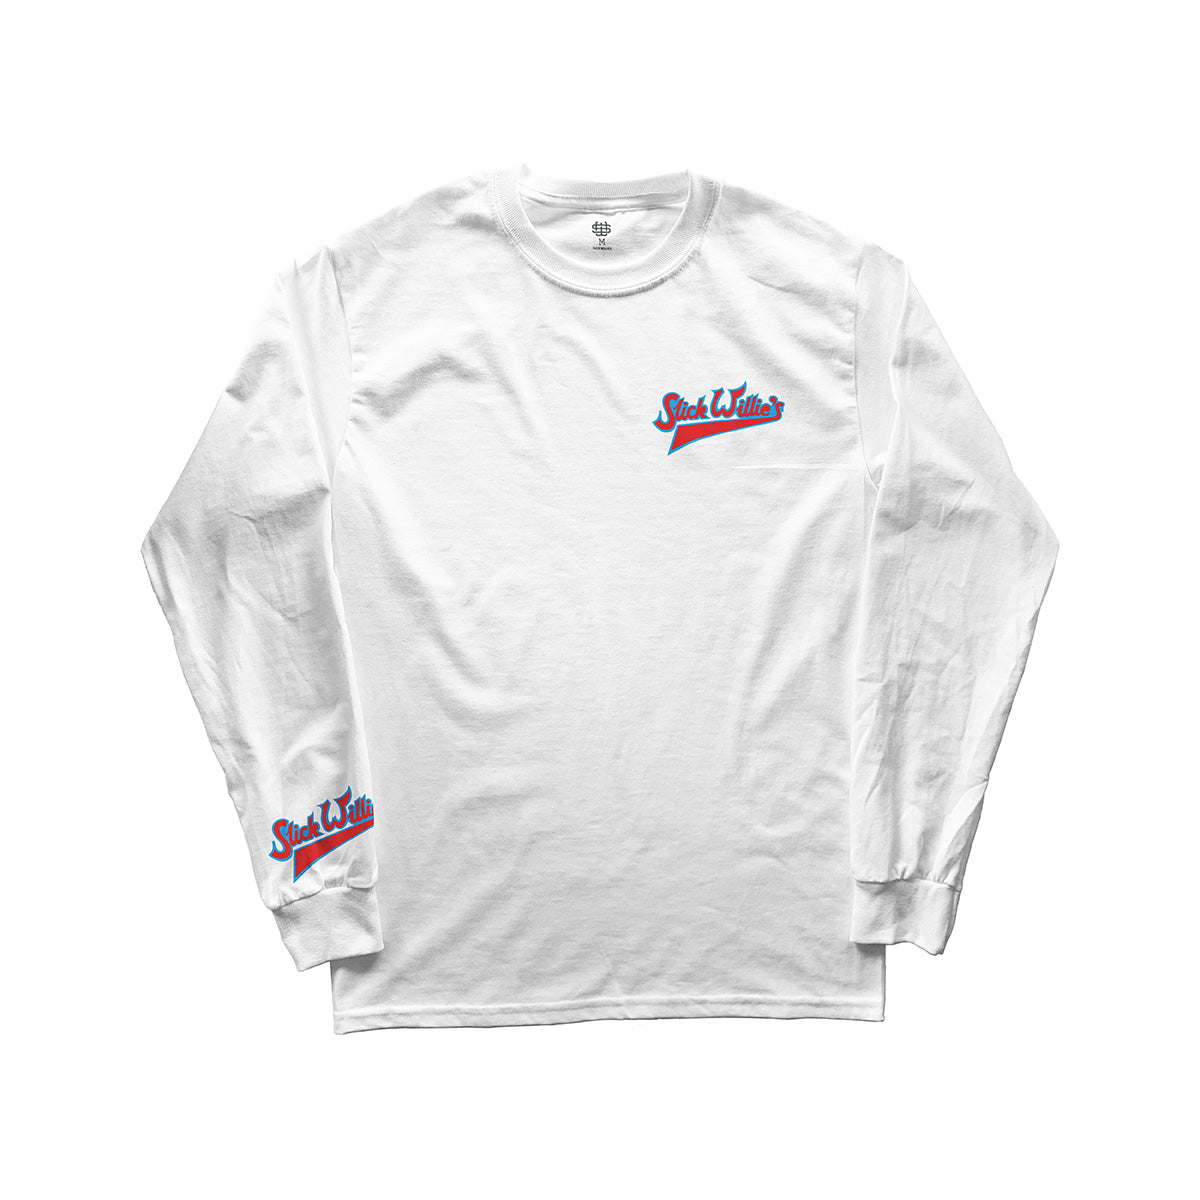 Slick Willie's Limited Edition 1970's Team Long sleeve - White